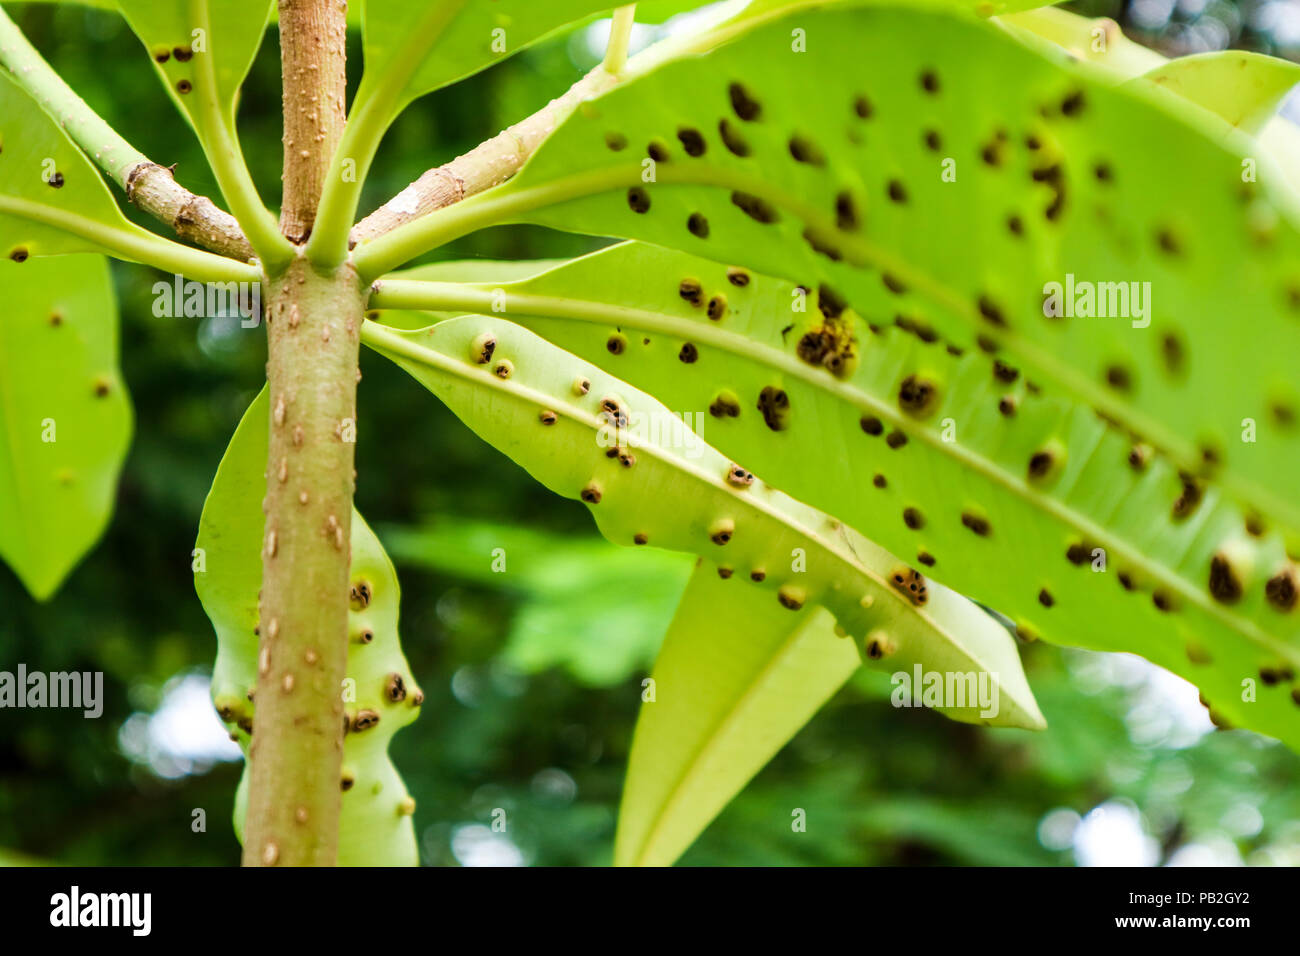 Frog-eye leaf spot or Cercospora diseases on leaves of Suicide tree Stock Photo